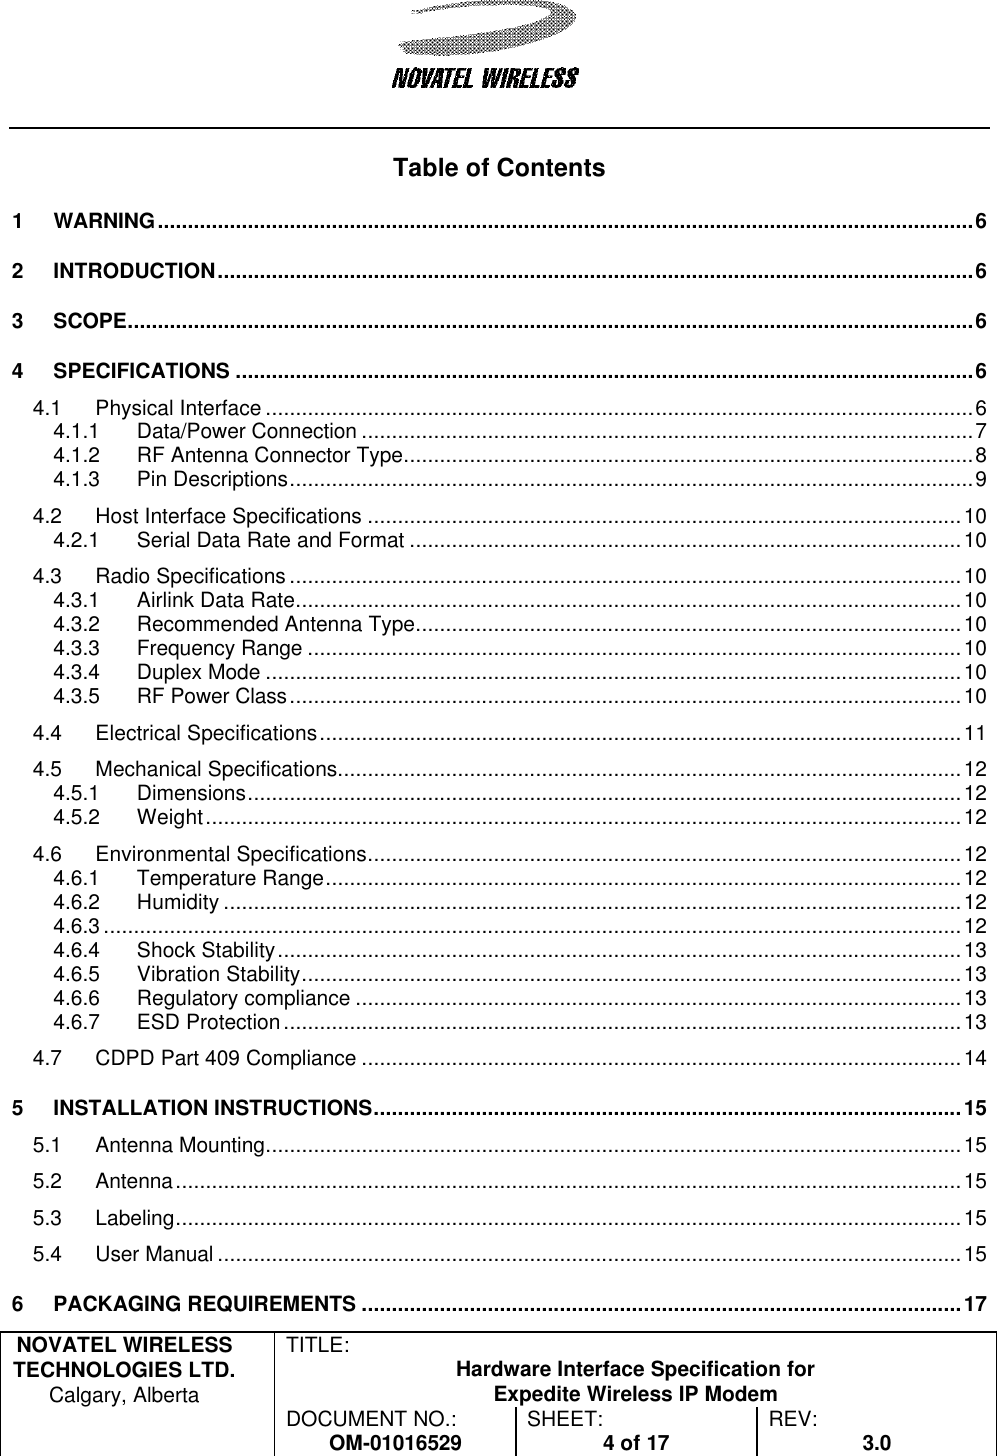   NOVATEL WIRELESS TECHNOLOGIES LTD.  Calgary, Alberta TITLE: Hardware Interface Specification for Expedite Wireless IP Modem  DOCUMENT NO.: OM-01016529 SHEET: 4 of 17 REV: 3.0    Table of Contents 1 WARNING........................................................................................................................................6 2 INTRODUCTION..............................................................................................................................6 3 SCOPE.............................................................................................................................................6 4 SPECIFICATIONS ...........................................................................................................................6 4.1 Physical Interface ......................................................................................................................6 4.1.1 Data/Power Connection ......................................................................................................7 4.1.2 RF Antenna Connector Type...............................................................................................8 4.1.3 Pin Descriptions..................................................................................................................9 4.2 Host Interface Specifications ...................................................................................................10 4.2.1 Serial Data Rate and Format ............................................................................................10 4.3 Radio Specifications ................................................................................................................10 4.3.1 Airlink Data Rate...............................................................................................................10 4.3.2 Recommended Antenna Type...........................................................................................10 4.3.3 Frequency Range .............................................................................................................10 4.3.4 Duplex Mode ....................................................................................................................10 4.3.5 RF Power Class................................................................................................................10 4.4 Electrical Specifications...........................................................................................................11 4.5 Mechanical Specifications........................................................................................................12 4.5.1 Dimensions.......................................................................................................................12 4.5.2 Weight..............................................................................................................................12 4.6 Environmental Specifications...................................................................................................12 4.6.1 Temperature Range..........................................................................................................12 4.6.2 Humidity ...........................................................................................................................12 4.6.3 ...............................................................................................................................................12 4.6.4 Shock Stability..................................................................................................................13 4.6.5 Vibration Stability..............................................................................................................13 4.6.6 Regulatory compliance .....................................................................................................13 4.6.7 ESD Protection.................................................................................................................13 4.7 CDPD Part 409 Compliance ....................................................................................................14 5 INSTALLATION INSTRUCTIONS..................................................................................................15 5.1 Antenna Mounting....................................................................................................................15 5.2 Antenna...................................................................................................................................15 5.3 Labeling...................................................................................................................................15 5.4 User Manual ............................................................................................................................15 6 PACKAGING REQUIREMENTS ....................................................................................................17 